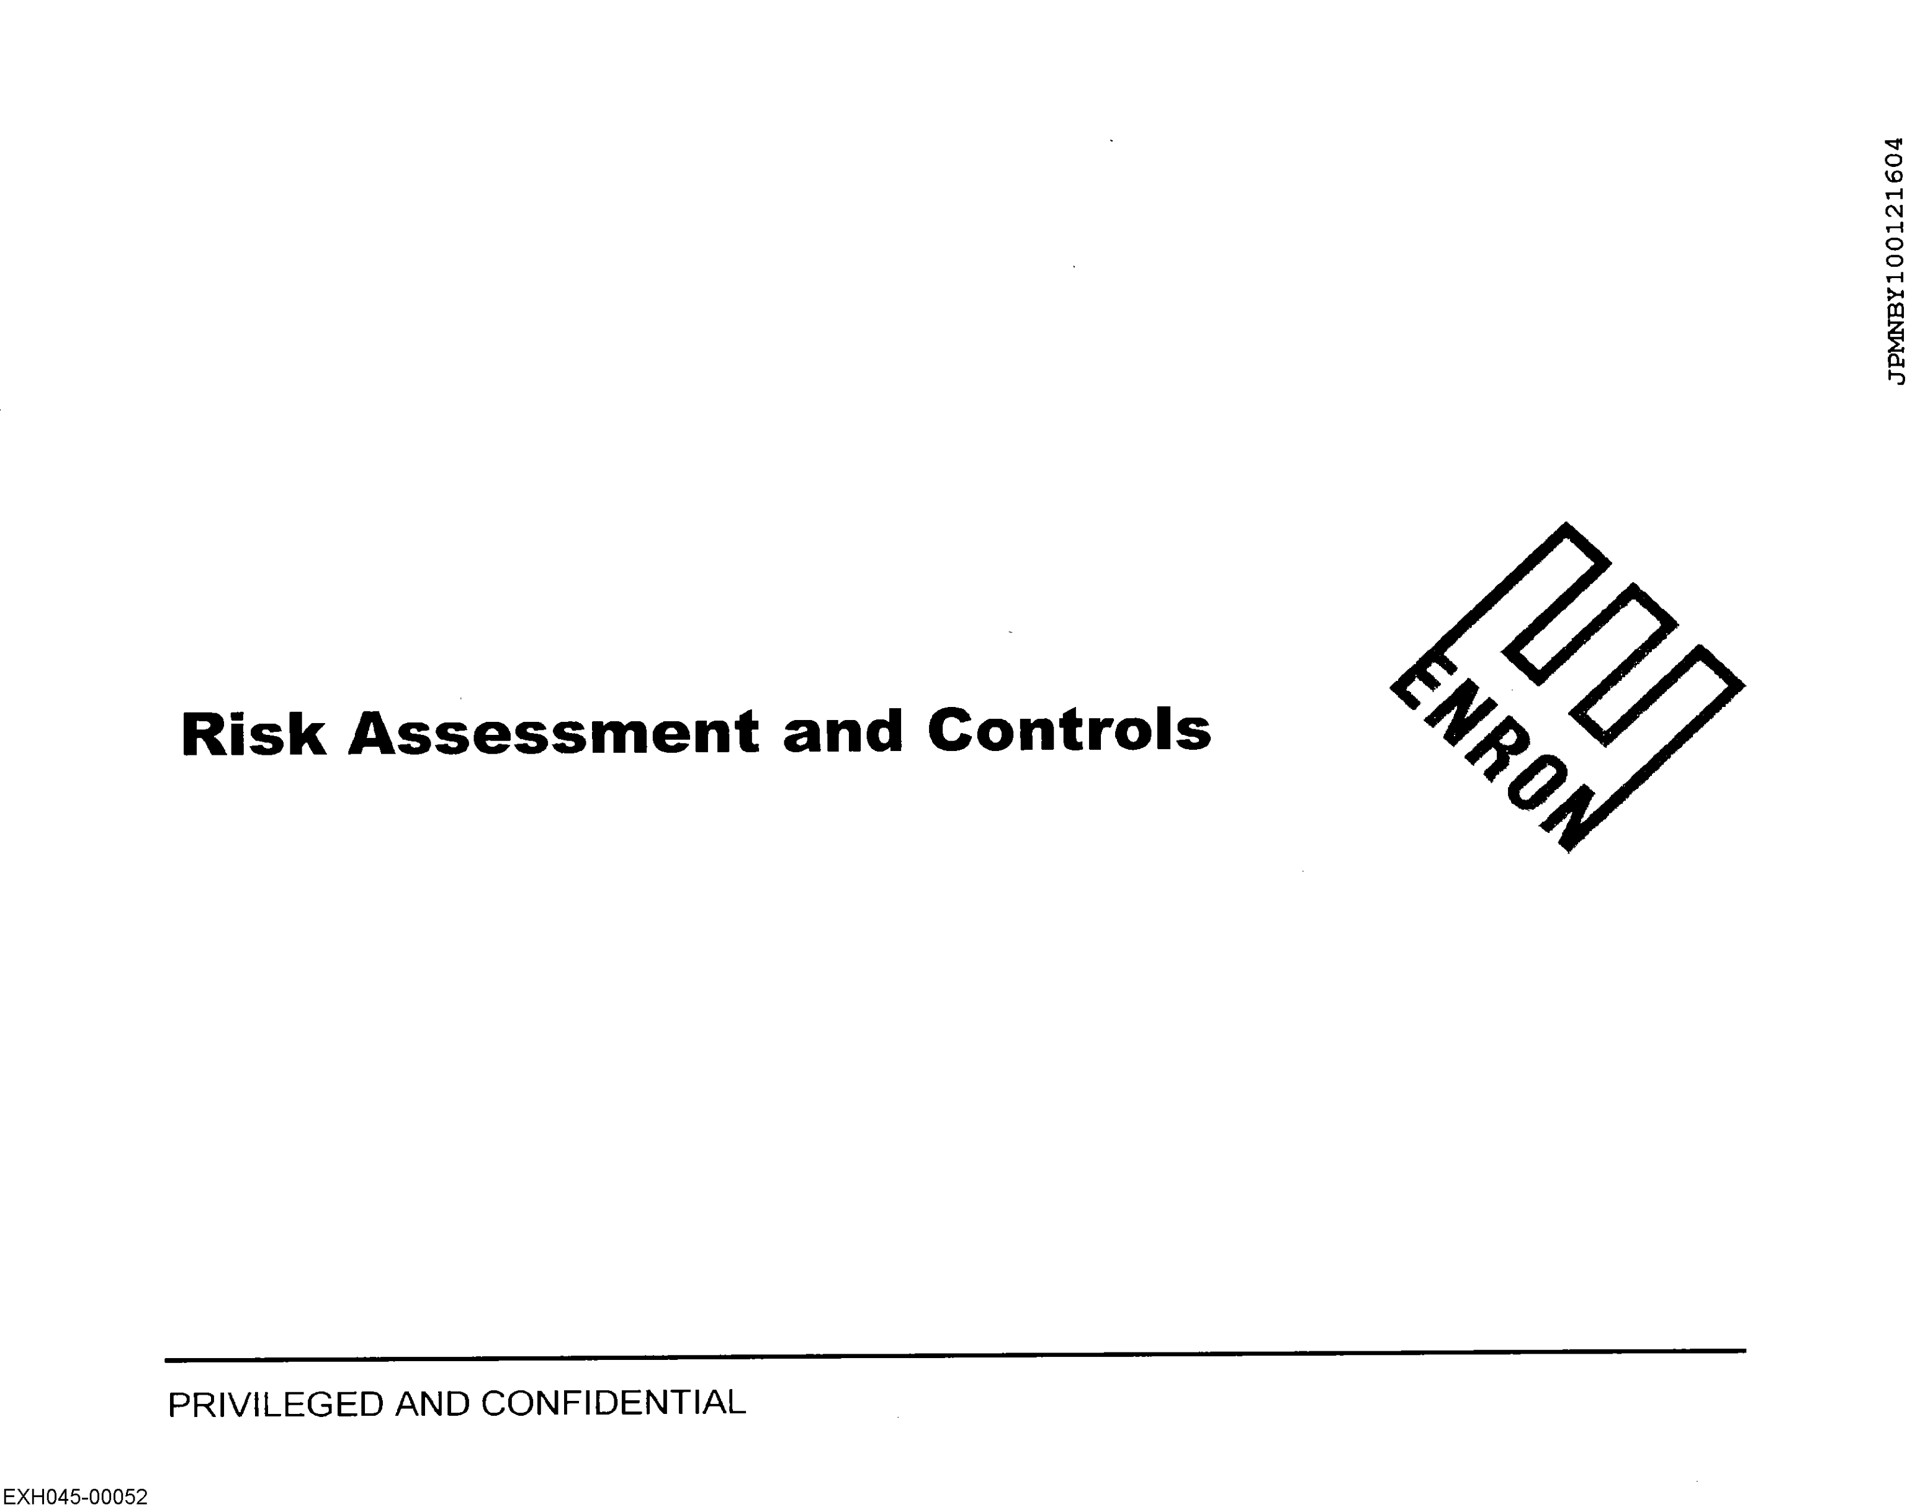 risk assessment and controls up | Enron